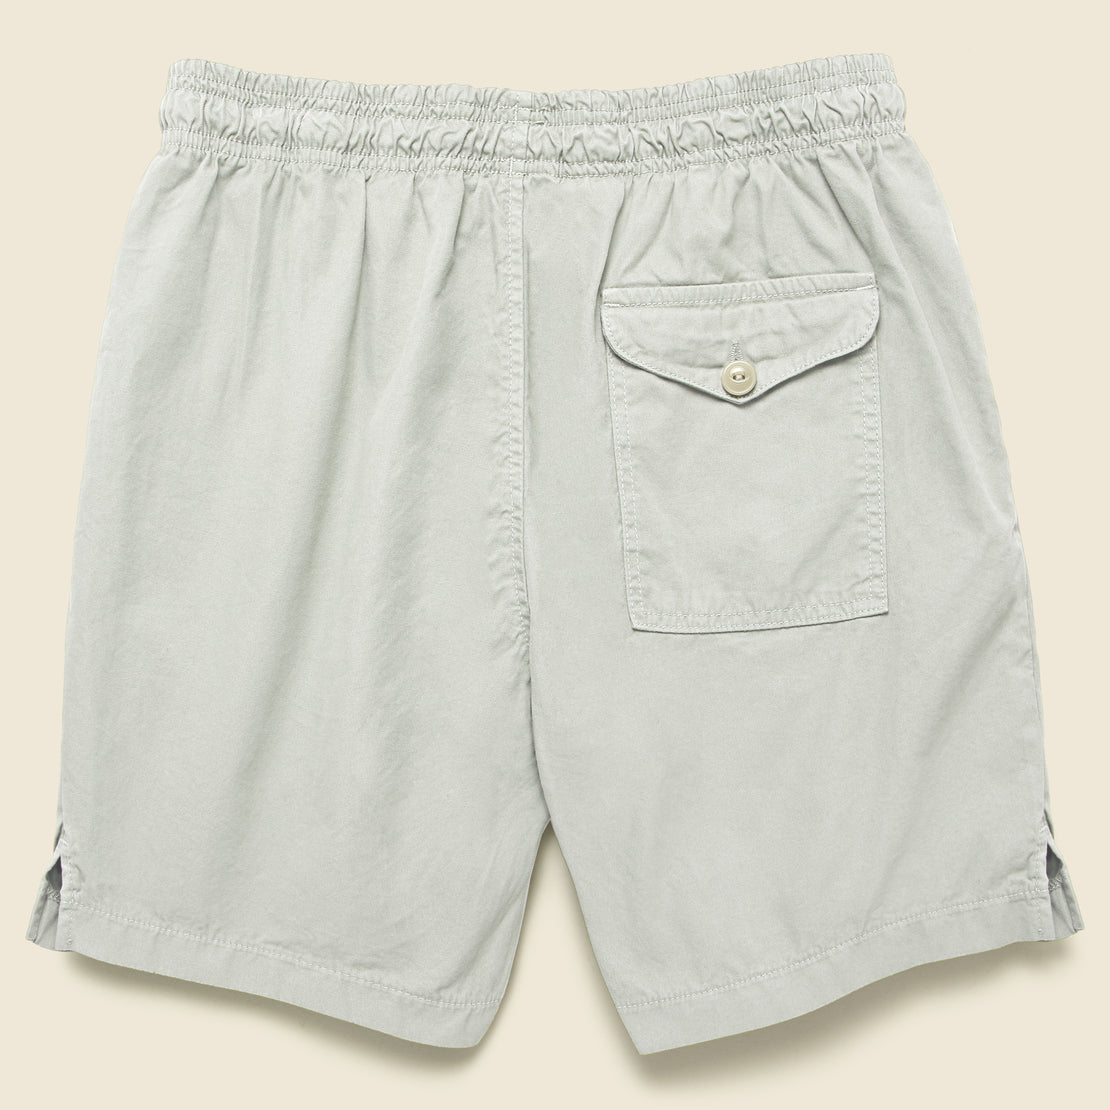 Twill Easy Short - Cement - Save Khaki - STAG Provisions - Shorts - Lounge